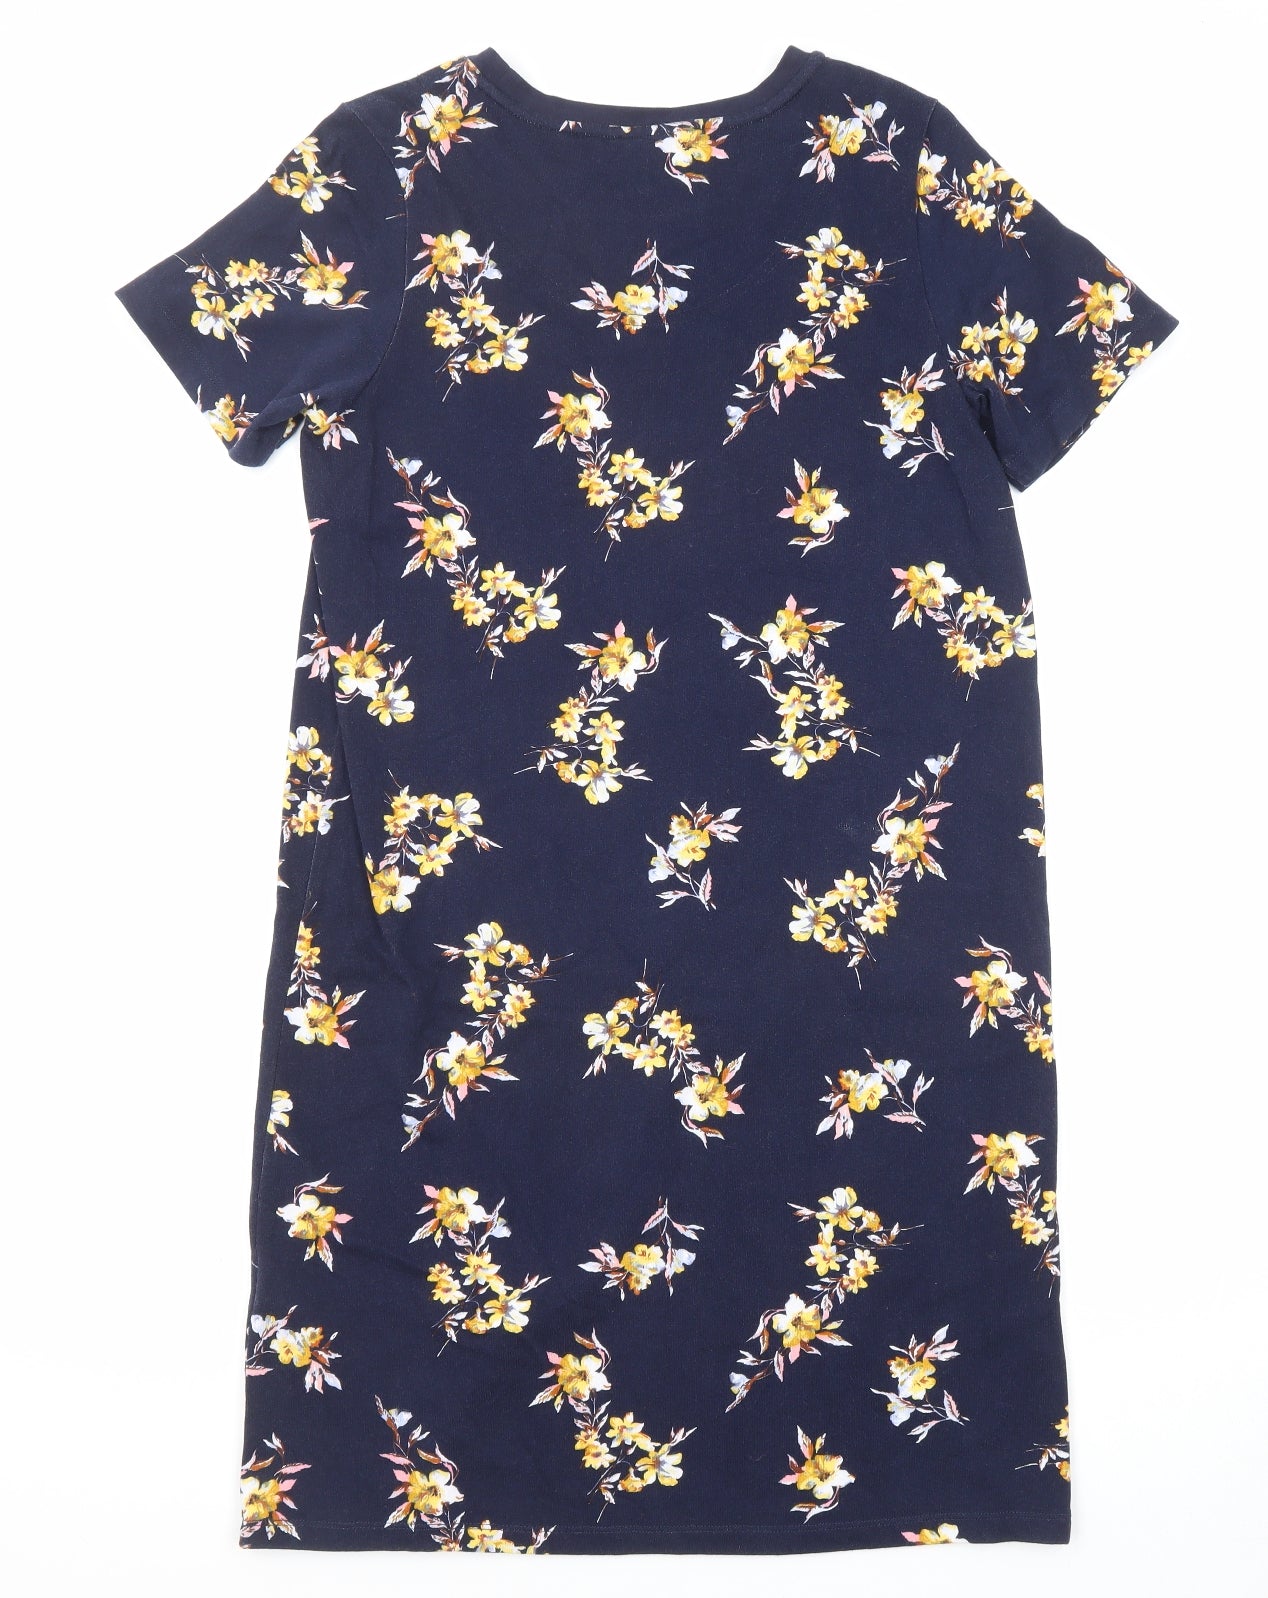 Joules Womens Blue Floral Cotton T-Shirt Dress Size 8 Round Neck Pullover